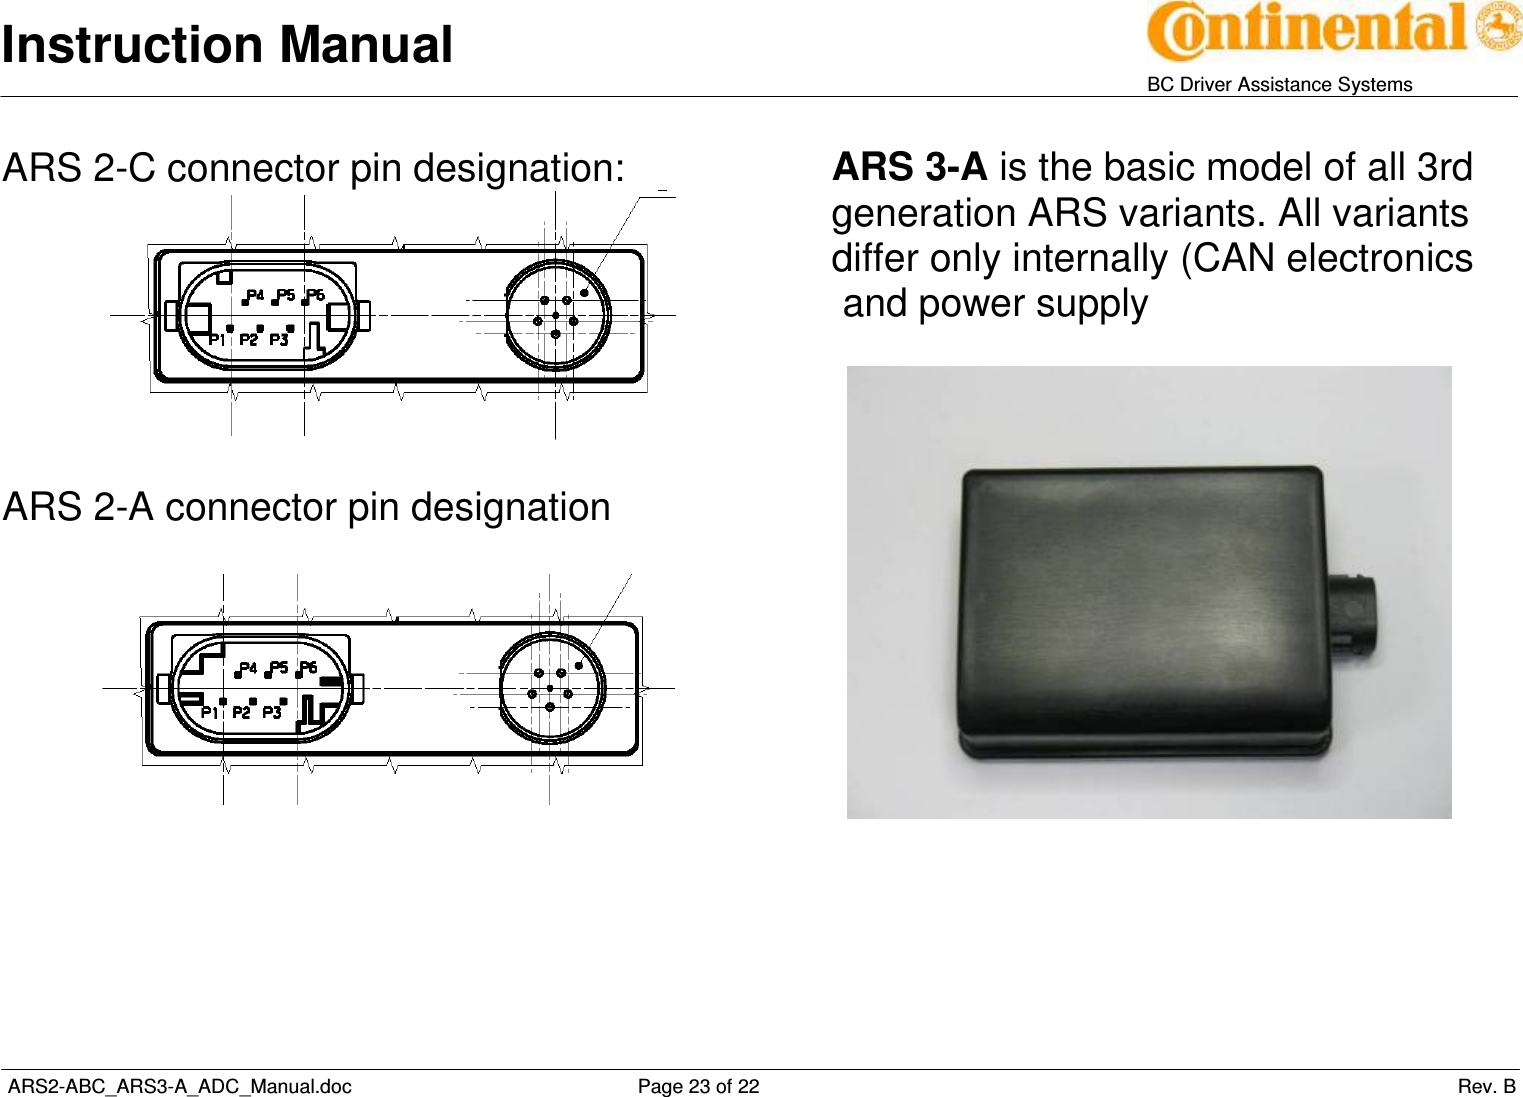 Instruction Manual   BC Driver Assistance Systems  ARS2-ABC_ARS3-A_ADC_Manual.doc     Page 23 of 22                 Rev. B ARS 2-C connector pin designation:   ARS 2-A connector pin designation         ARS 3-A is the basic model of all 3rd generation ARS variants. All variants differ only internally (CAN electronics  and power supply          